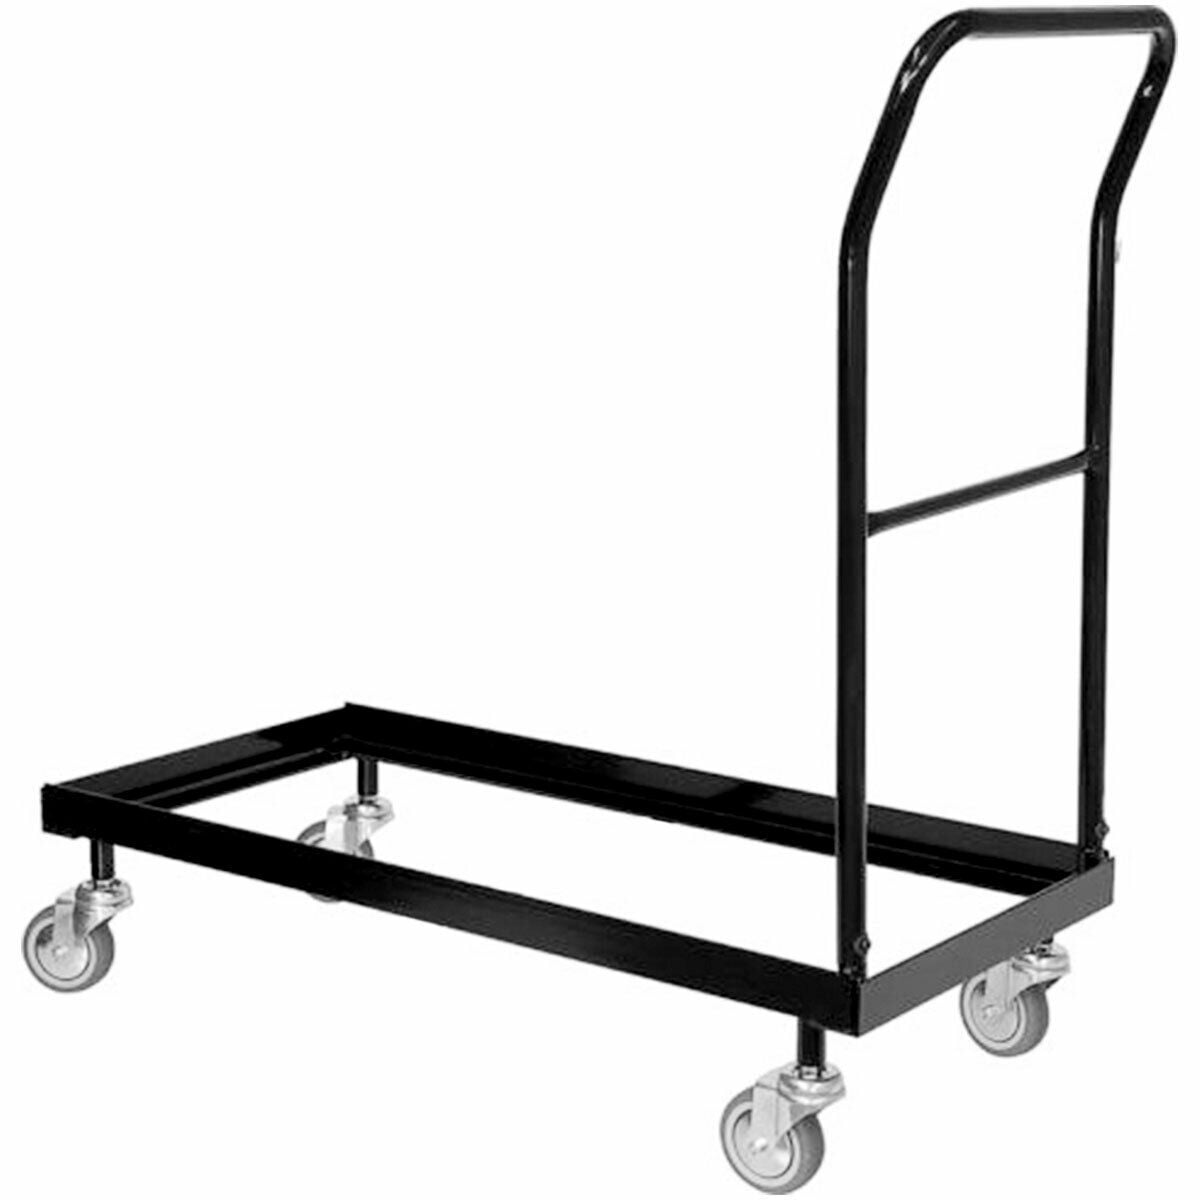 Black Folding Chair Cart Dolly Heavy Duty Steel Storage Up To 50 Chairs Capacity 